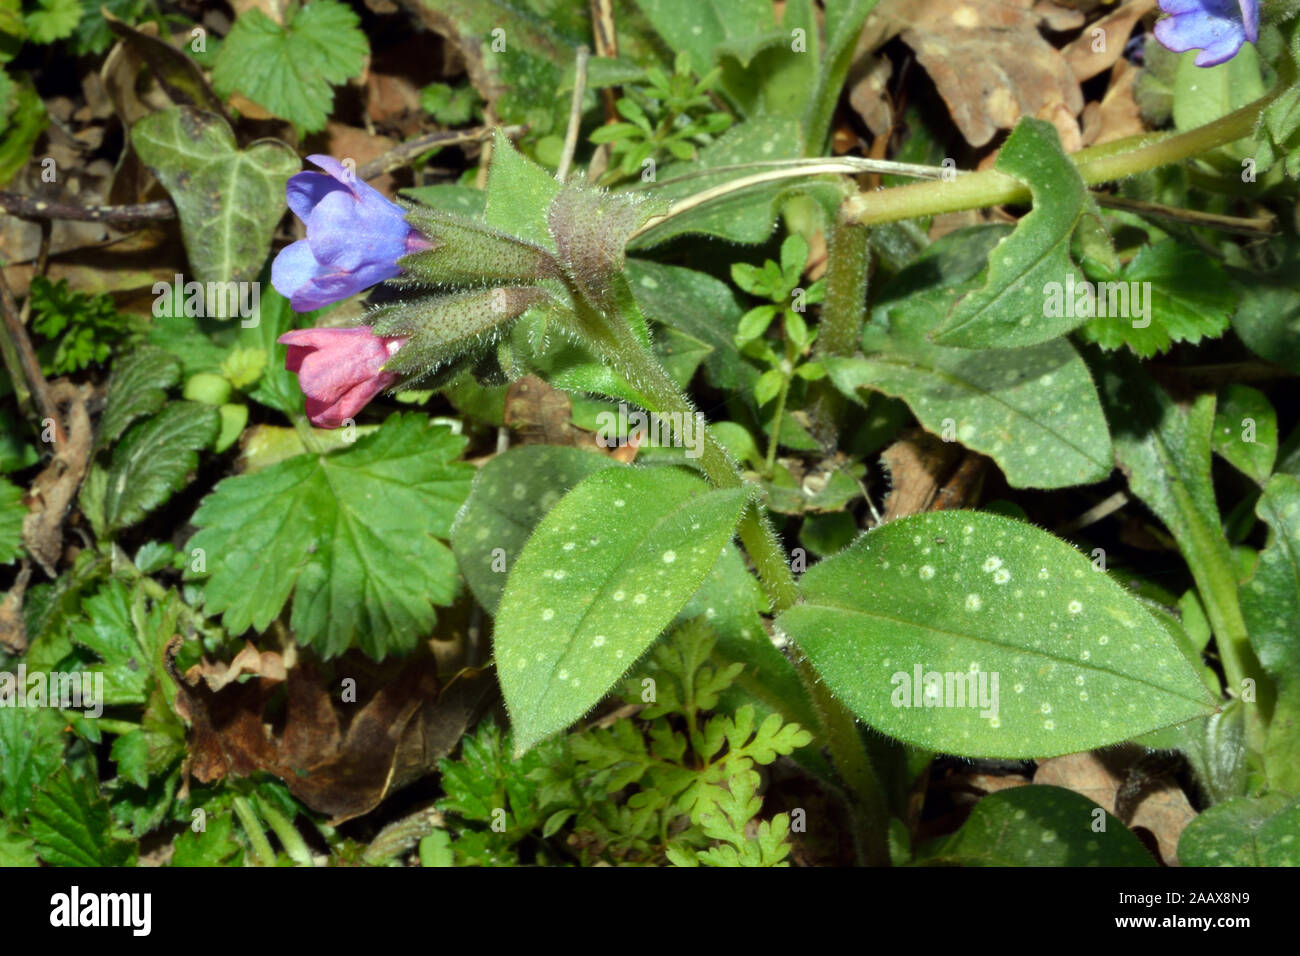 Pulmonaria officinalis (lungwort) is thought to be one of the most widespread plants in Europe. It occurs in deciduous and beech mixed forests. Stock Photo